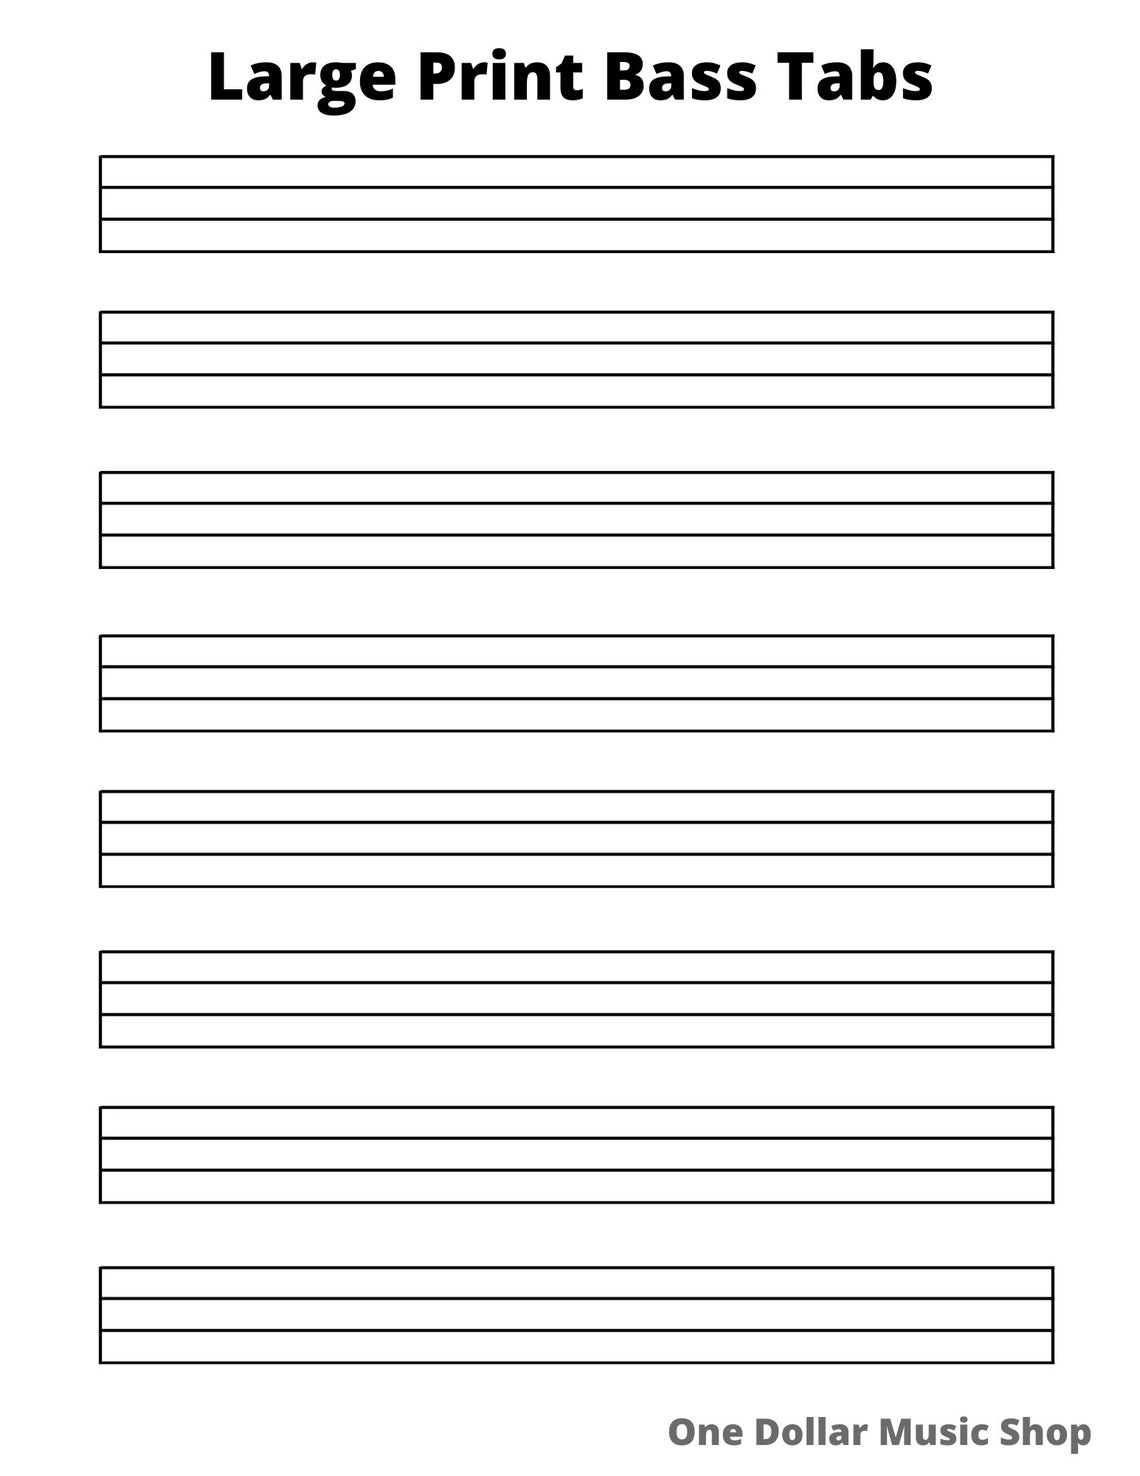 large-print-blank-bass-tab-sheet-instant-download-large-etsy